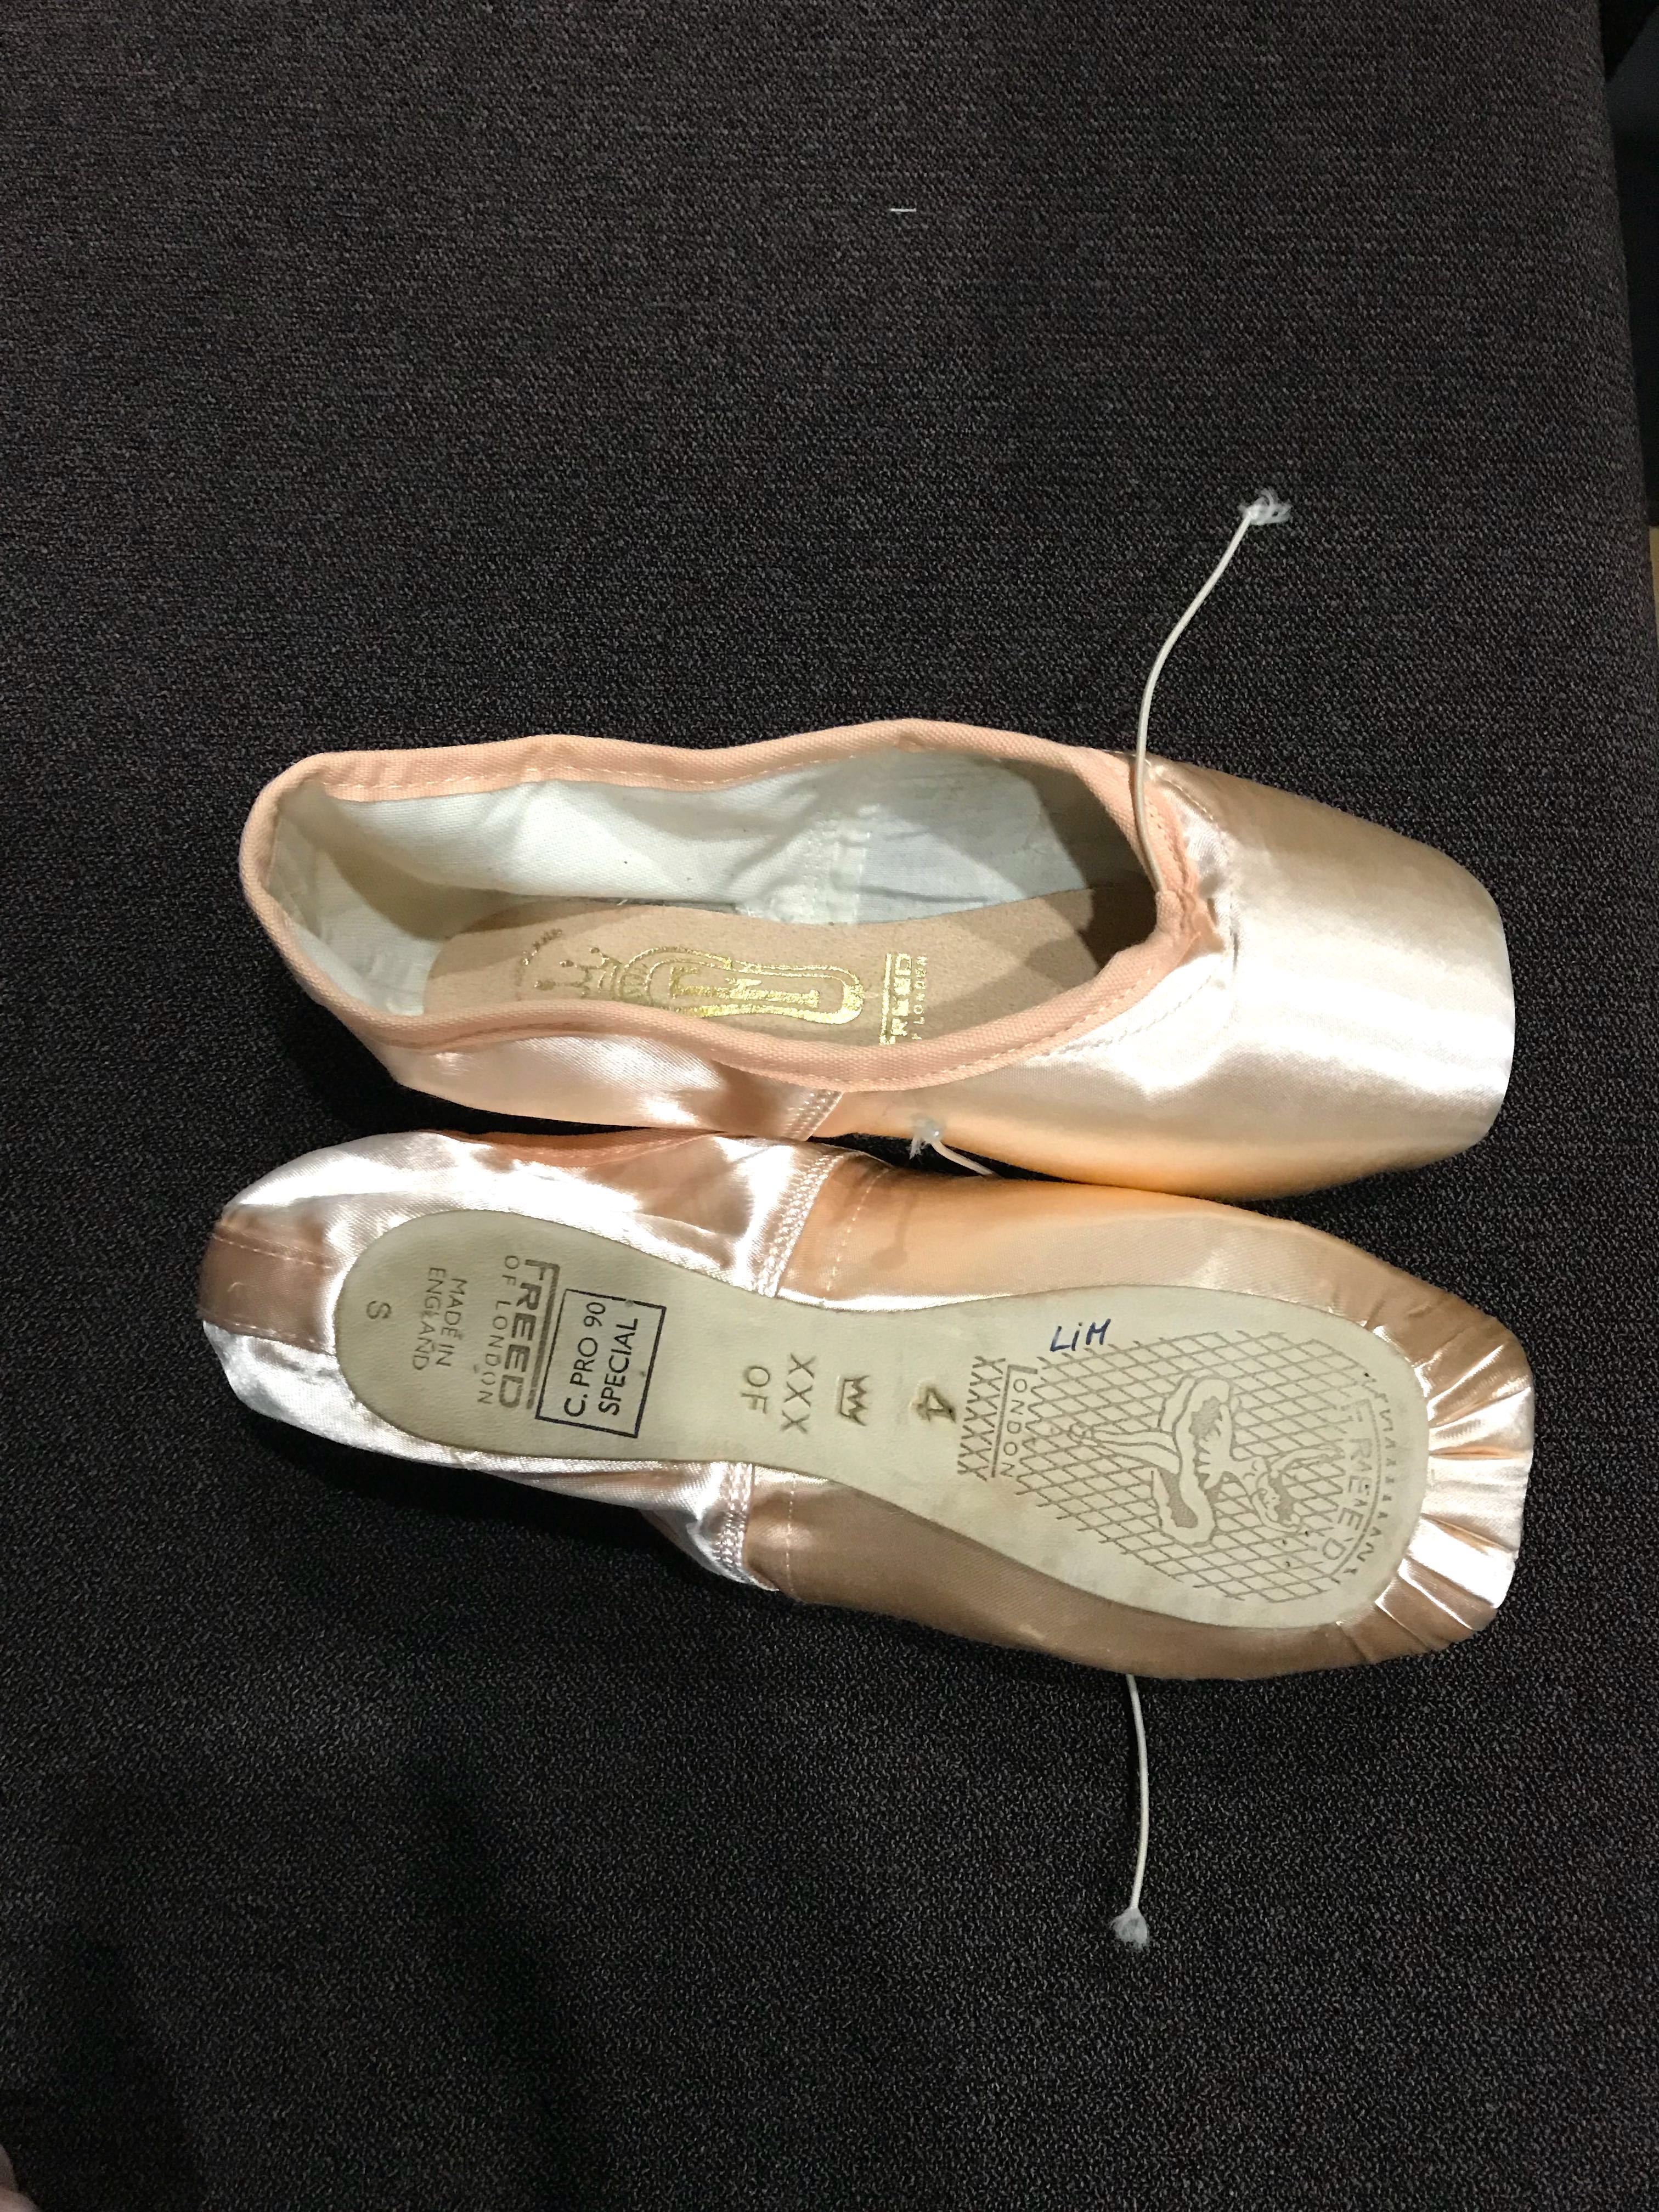 freed pointe shoes online